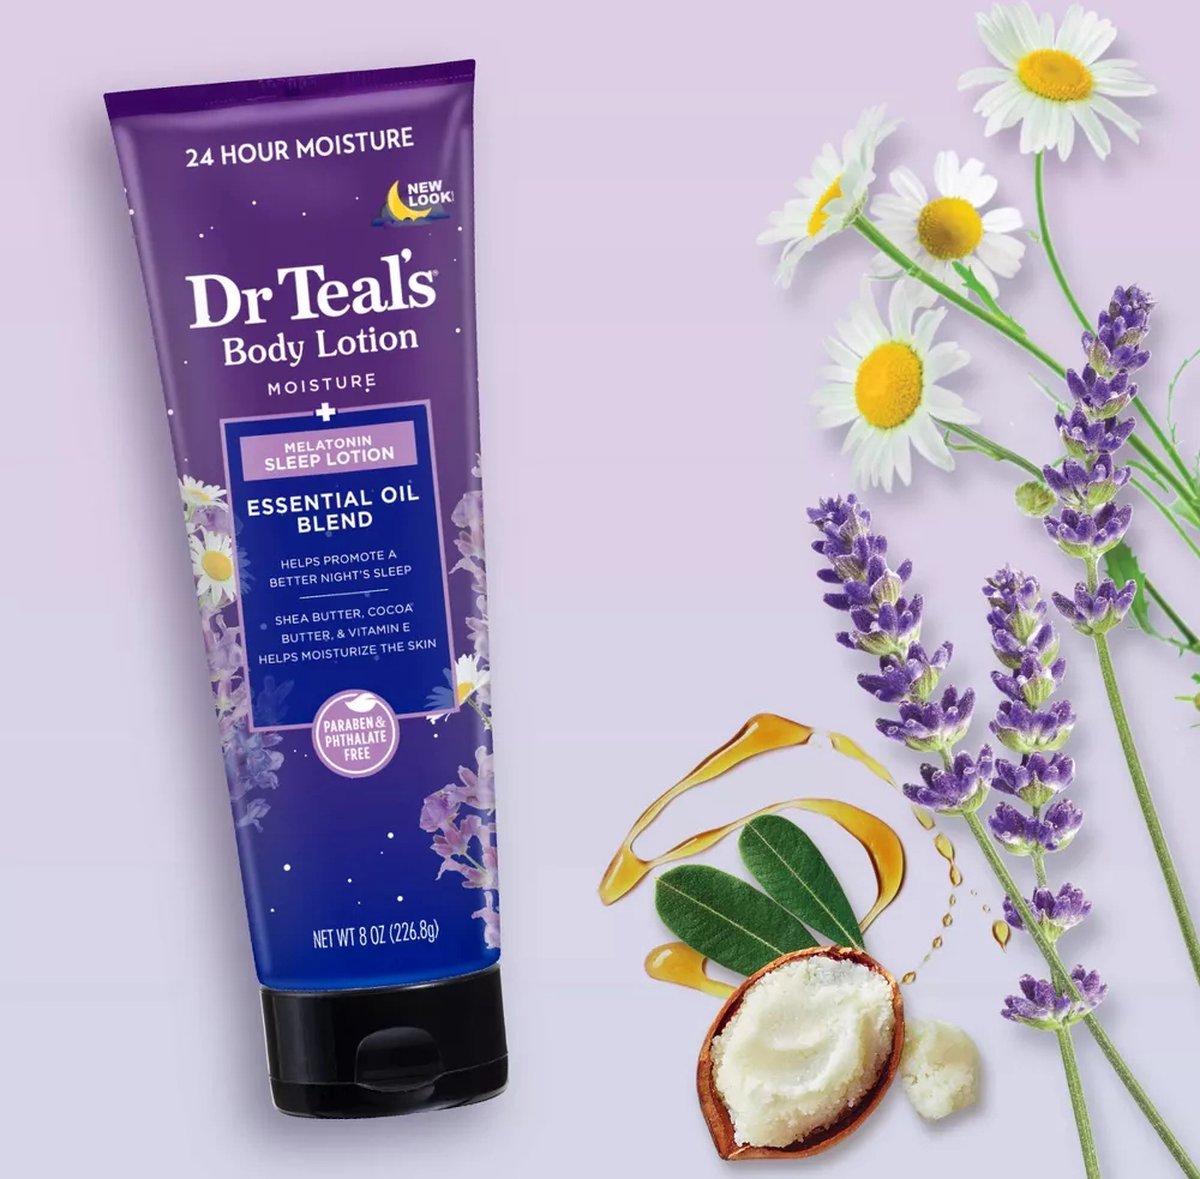 Dr Teal's Sleep Lotion by Dr Teal's 240 ml - Sleep Lotion with Melatonin & Essential Oils Promotes a better night's sleep (Shea butter, Cocoa Butter and Vitamin E